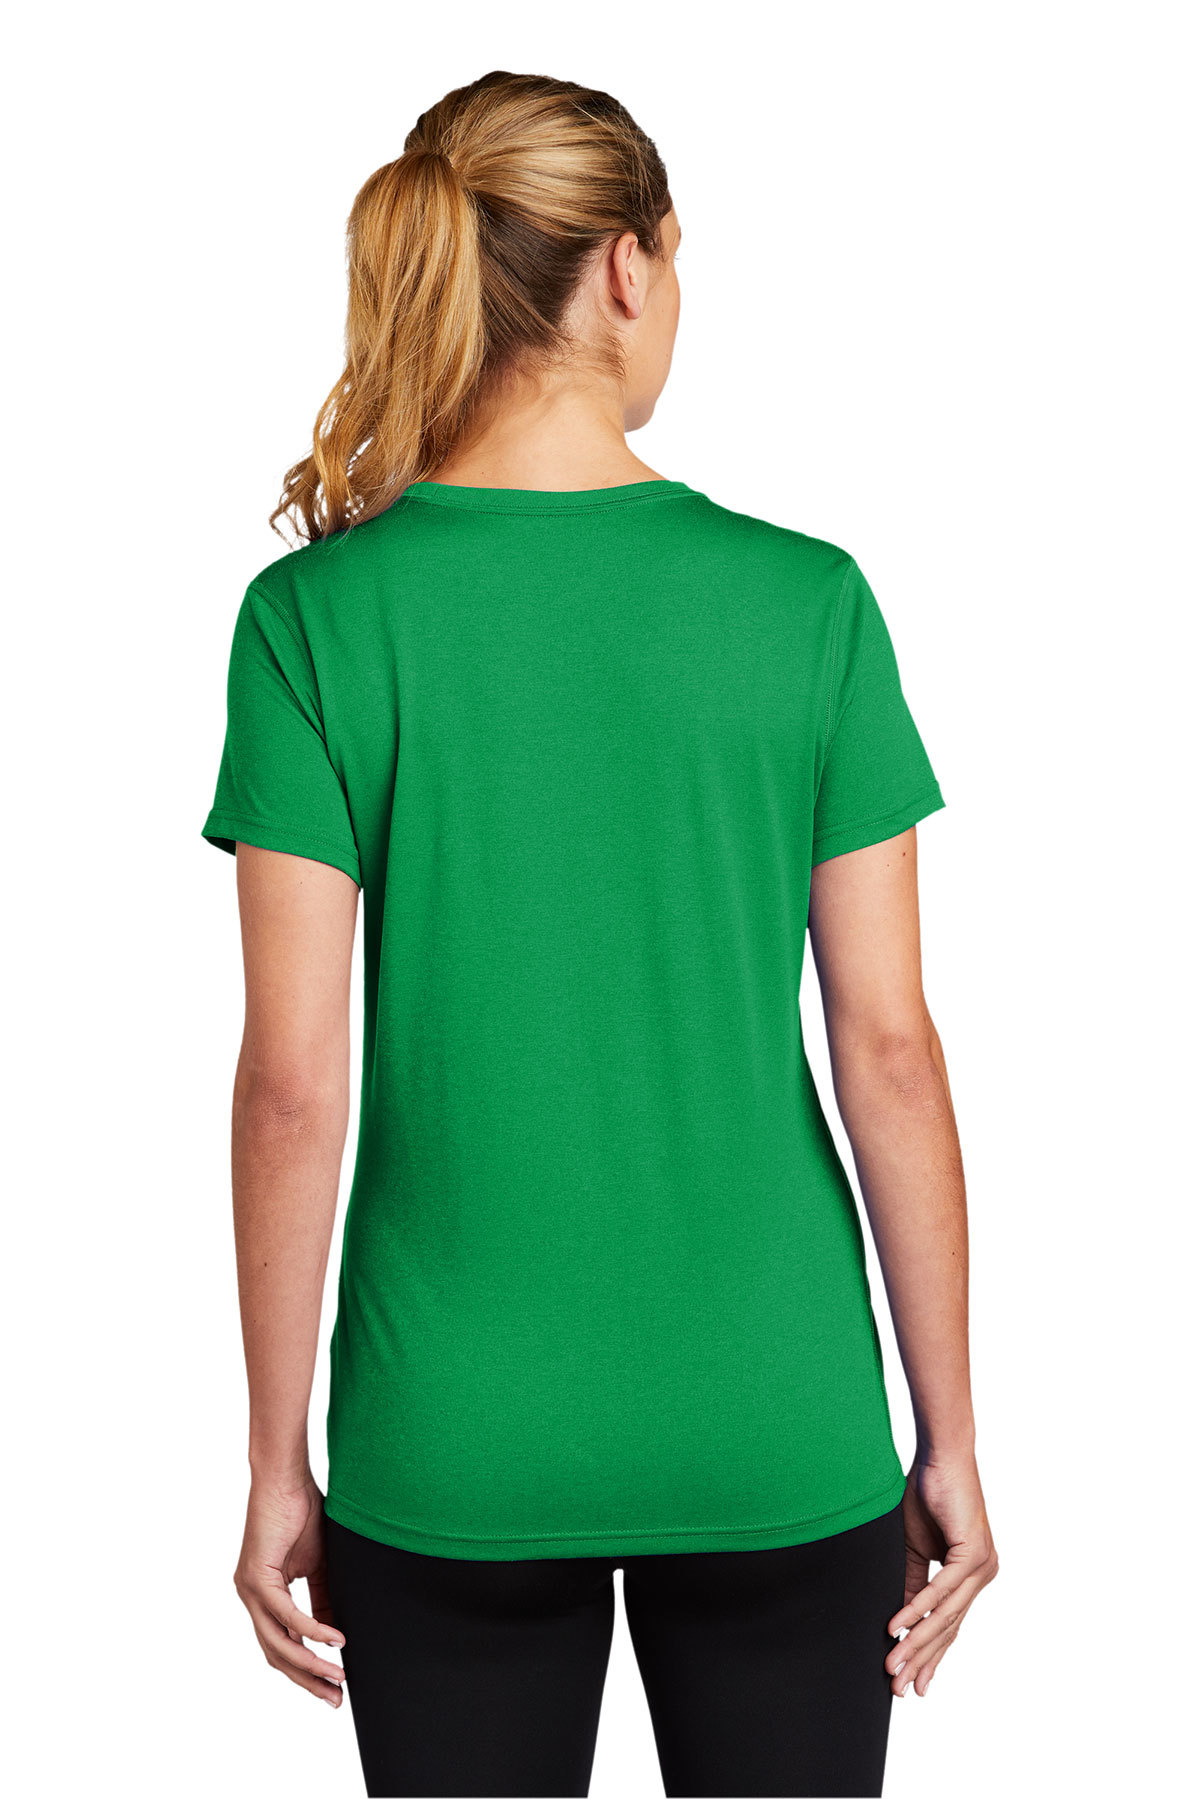 Nike Ladies Legend Tee | Product | Company Casuals